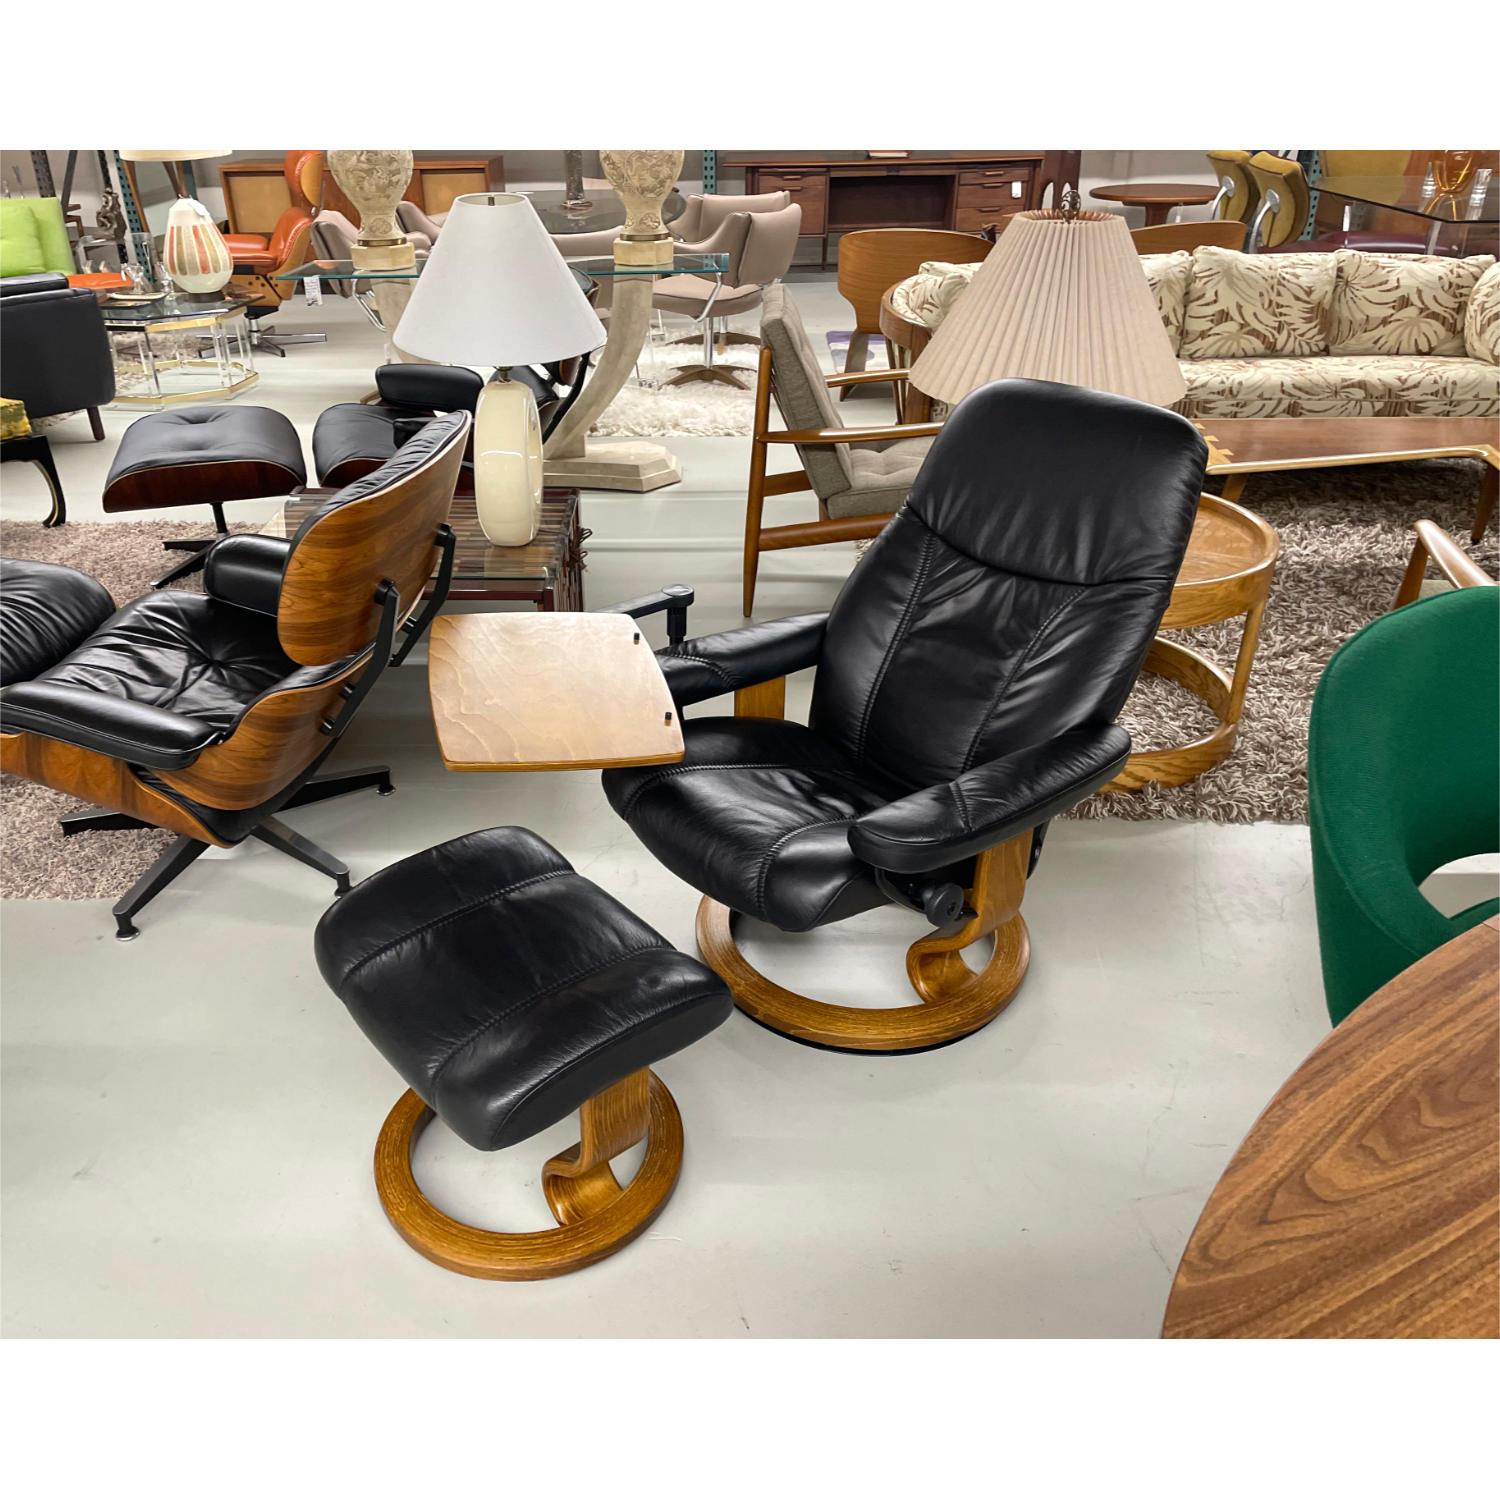 Black leather Ekornes Stressless chair complete with ottoman and removable computer table. This pre-owned Ekornes Stressless chair is in great condition. The same can be said for the ottoman and the personal table. Ekornes Stressless has become